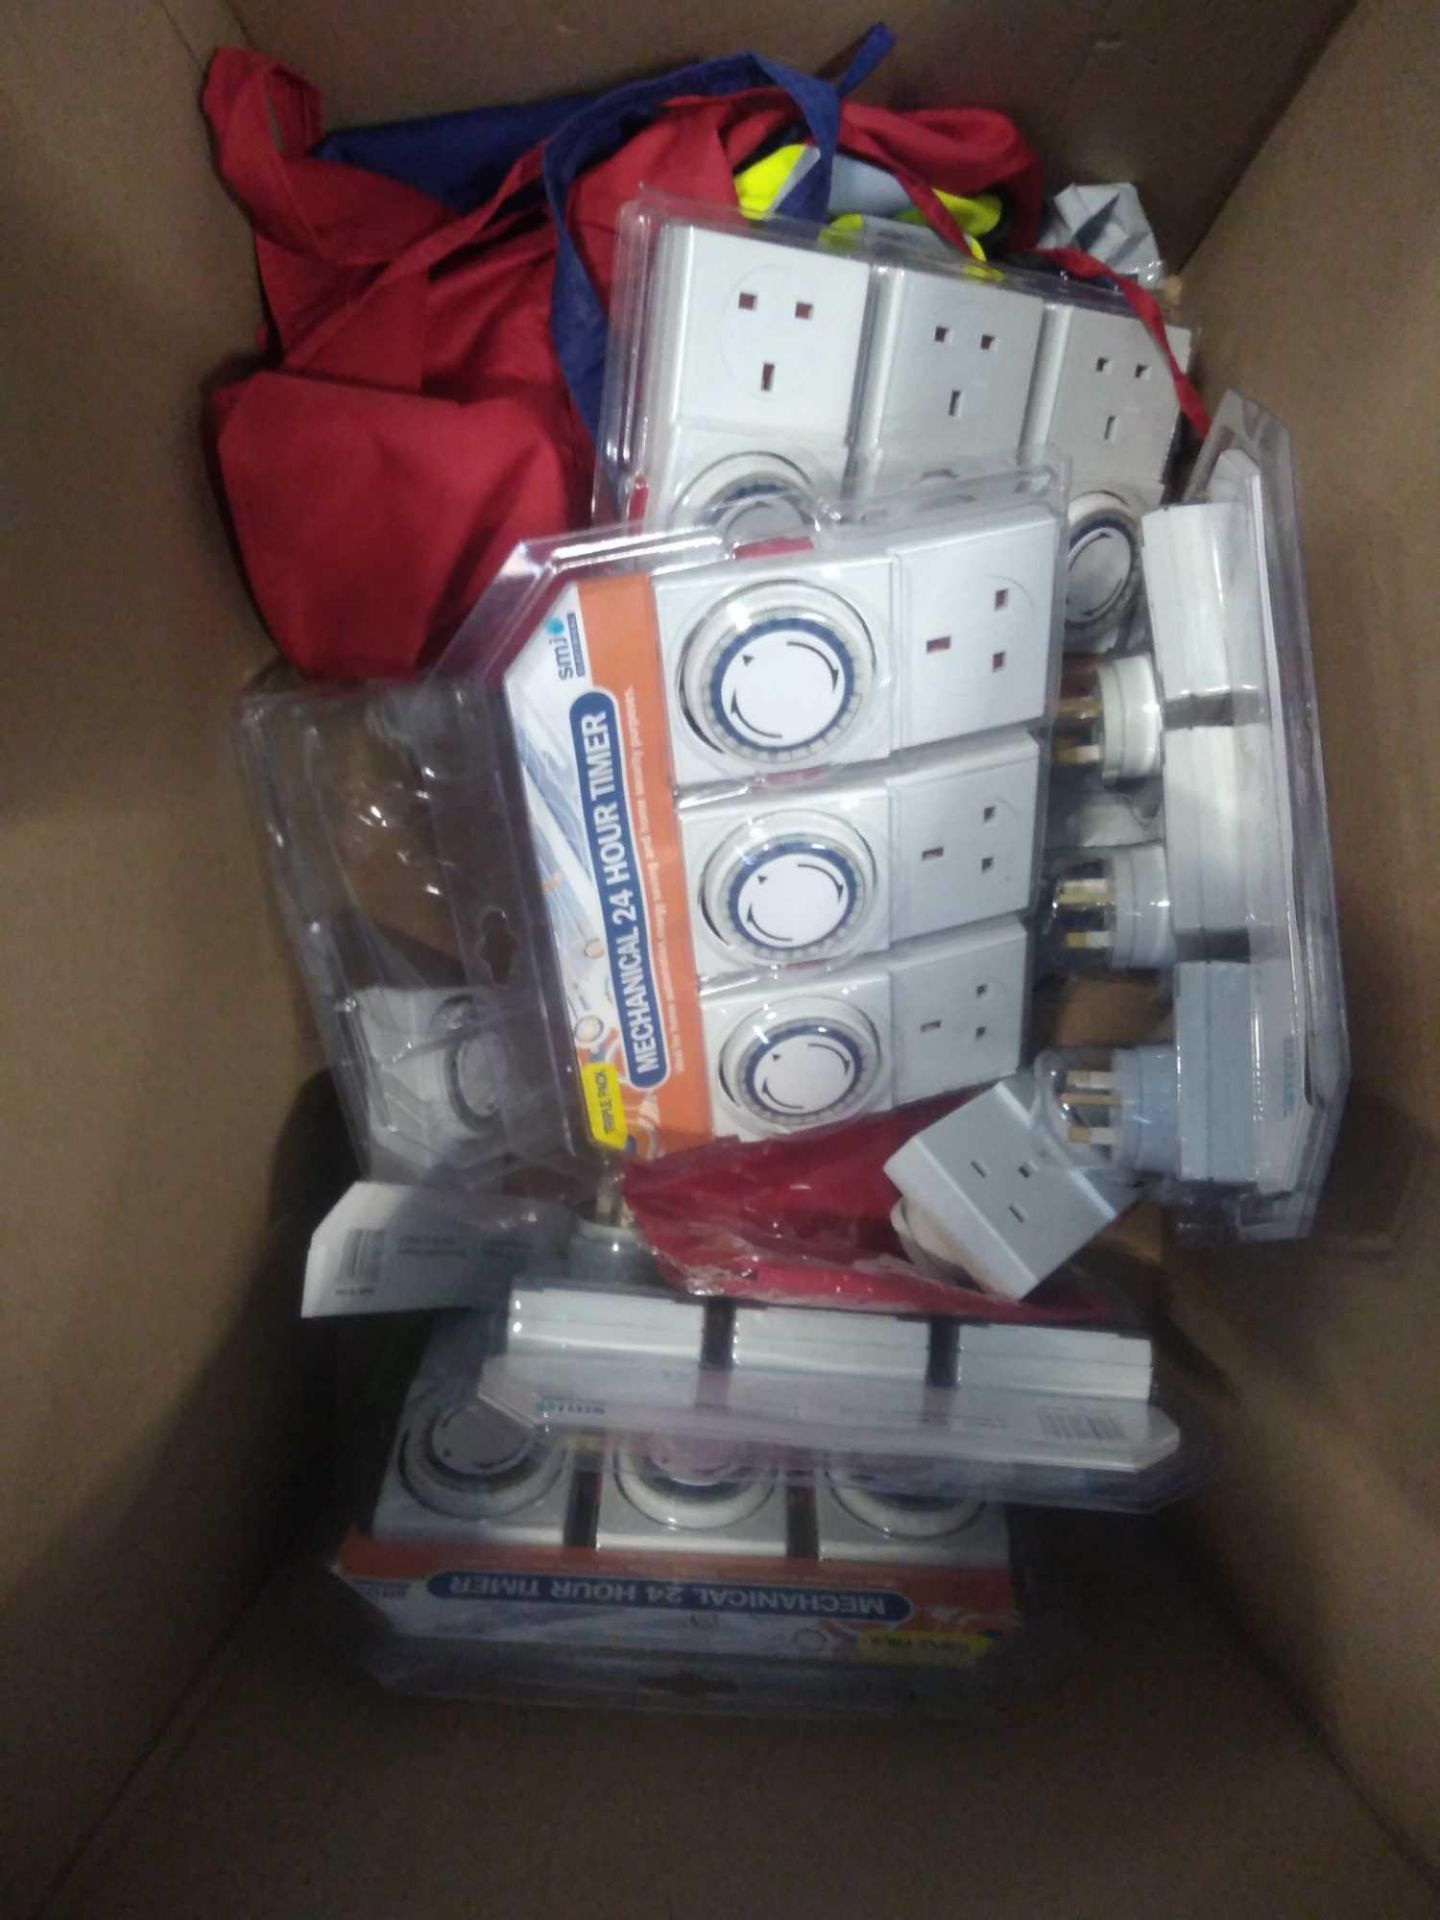 1 LOT TO CONTAIN APPROX 16 24 HOIR TIMER SOCKETS FOR HOUSEHOLD APPLIANCES AND OTHER ITEMS